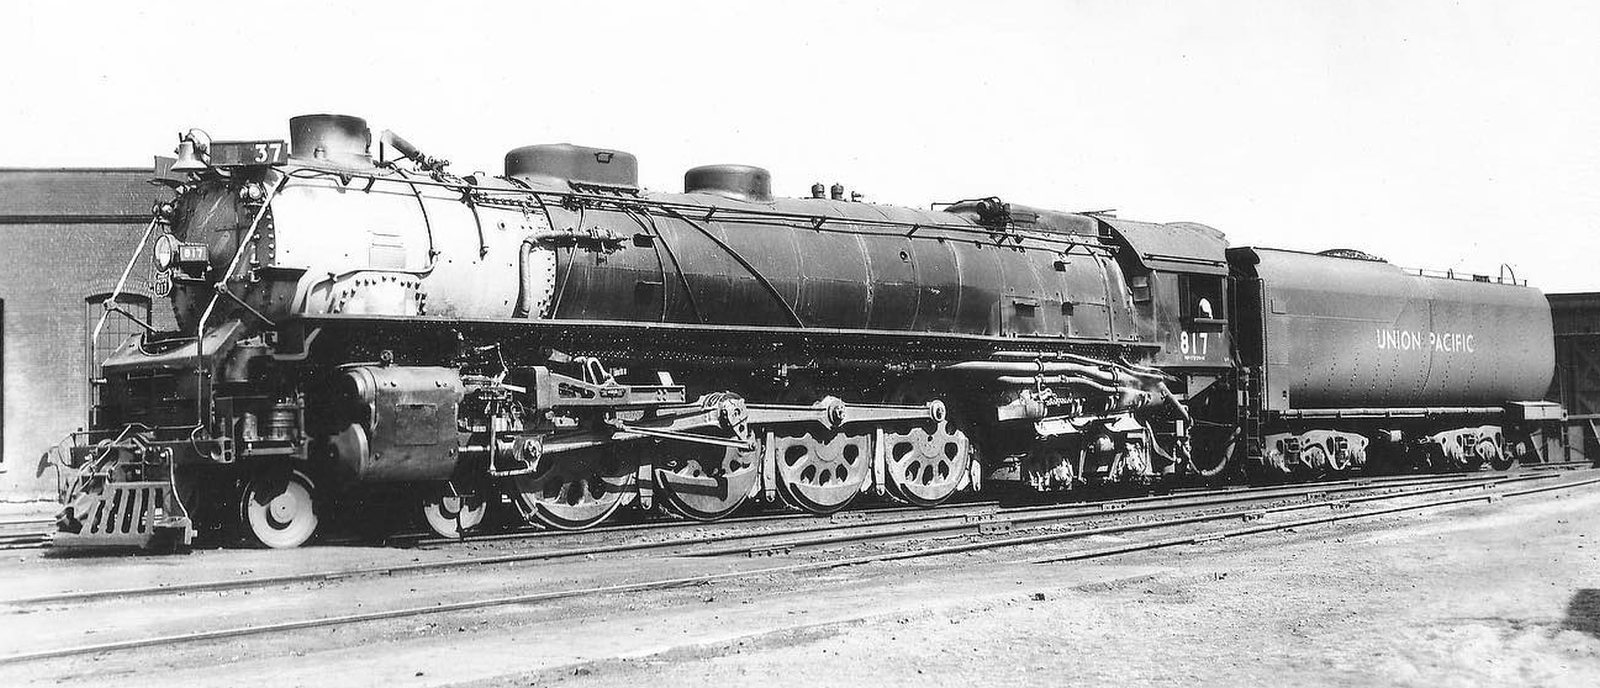 FEF-1 No. 817 before conversion to oil firing in 1946